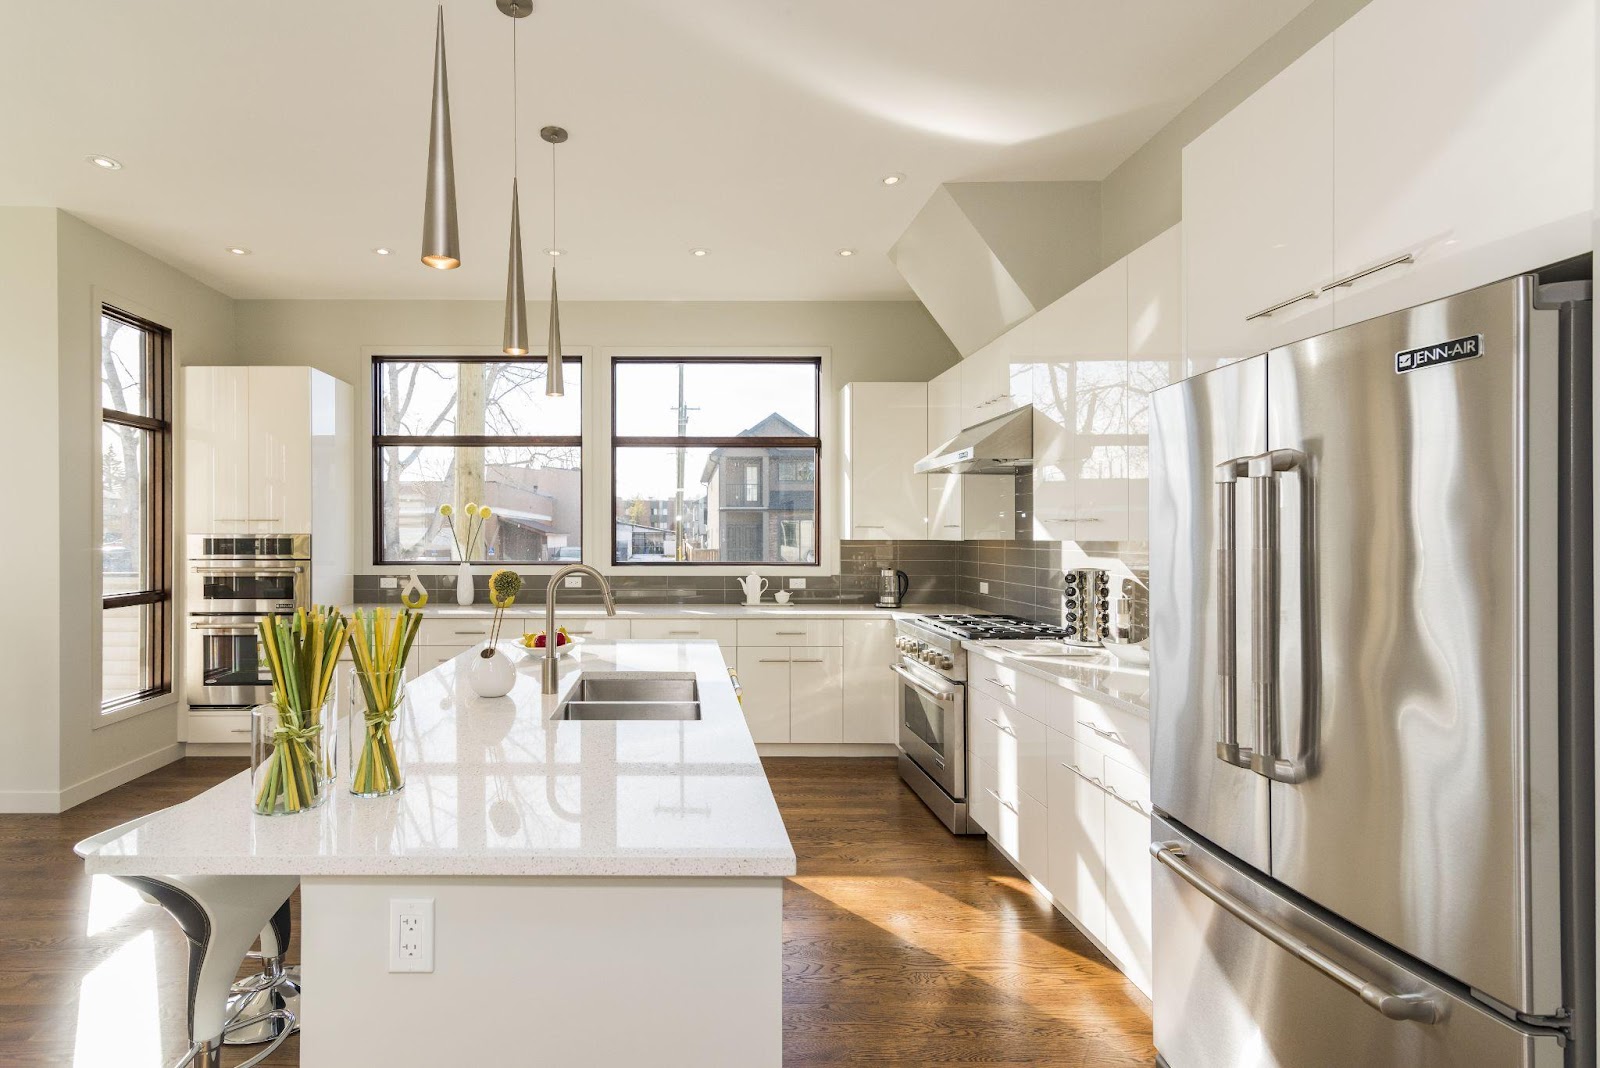 Keeping your Kitchens Well-Maintained